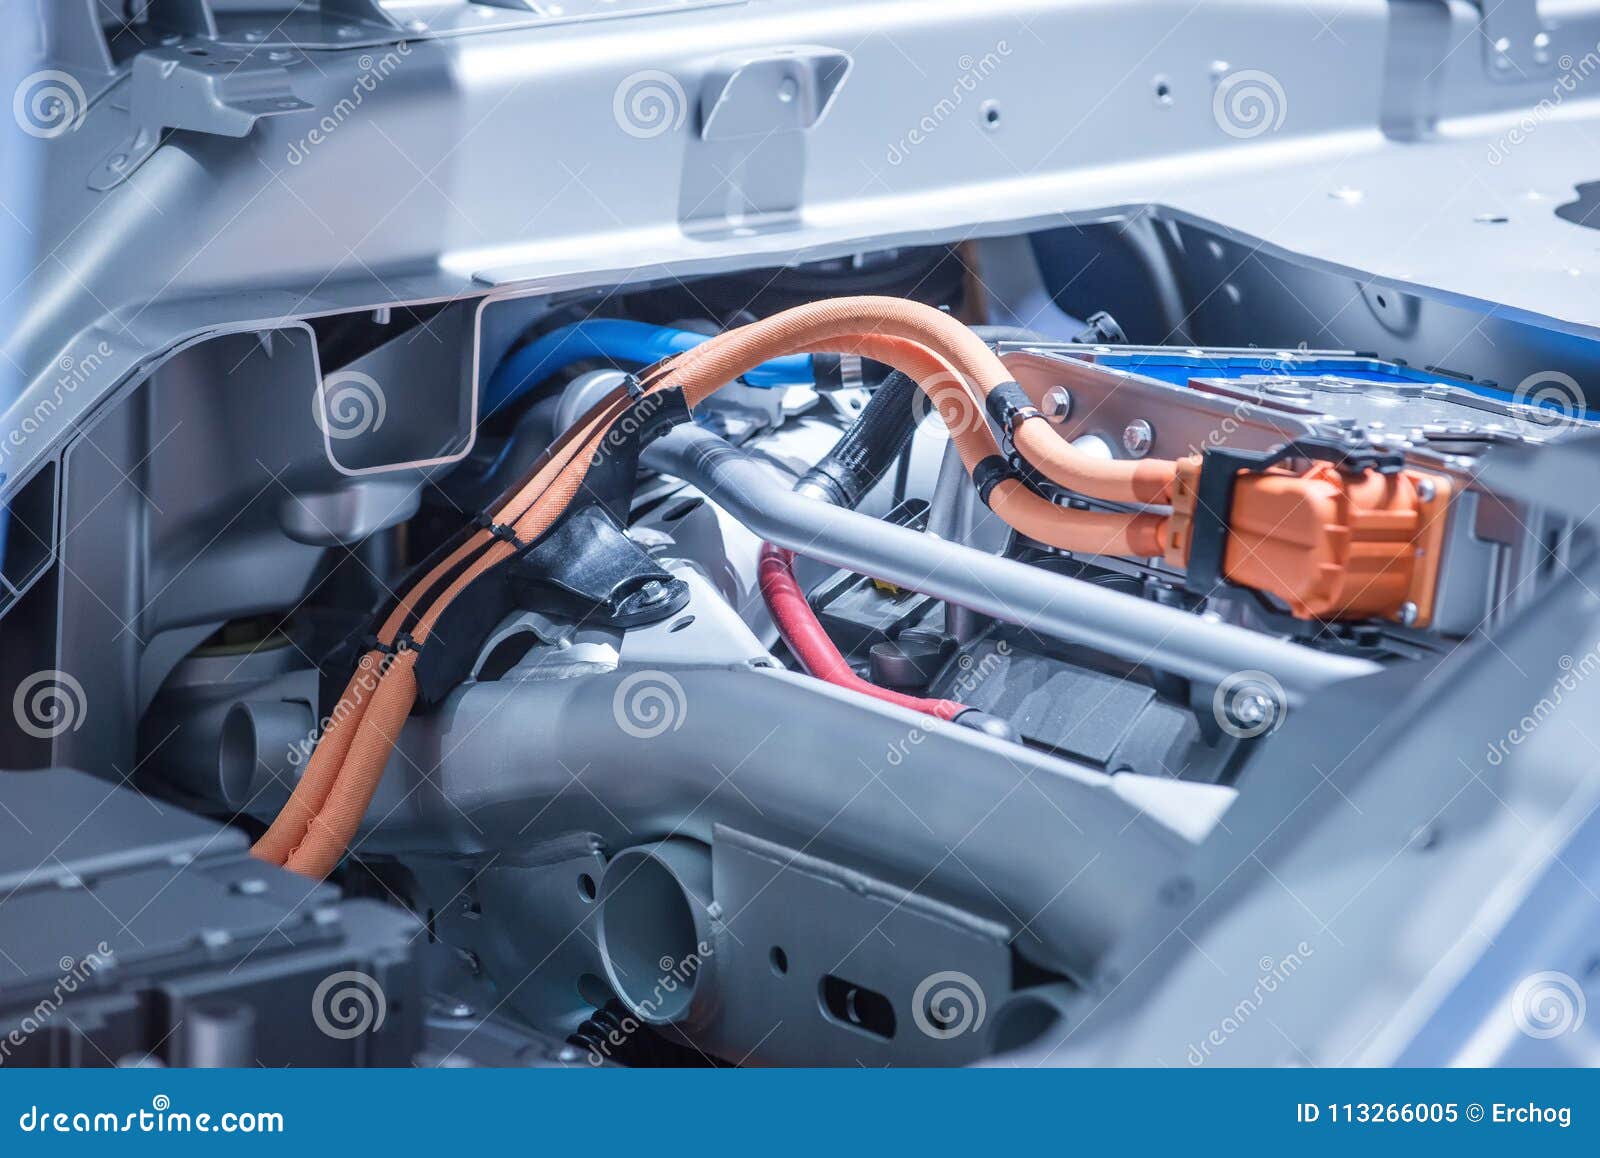 chassis of the electric car with powertrain and power connections closeup. blue toned.